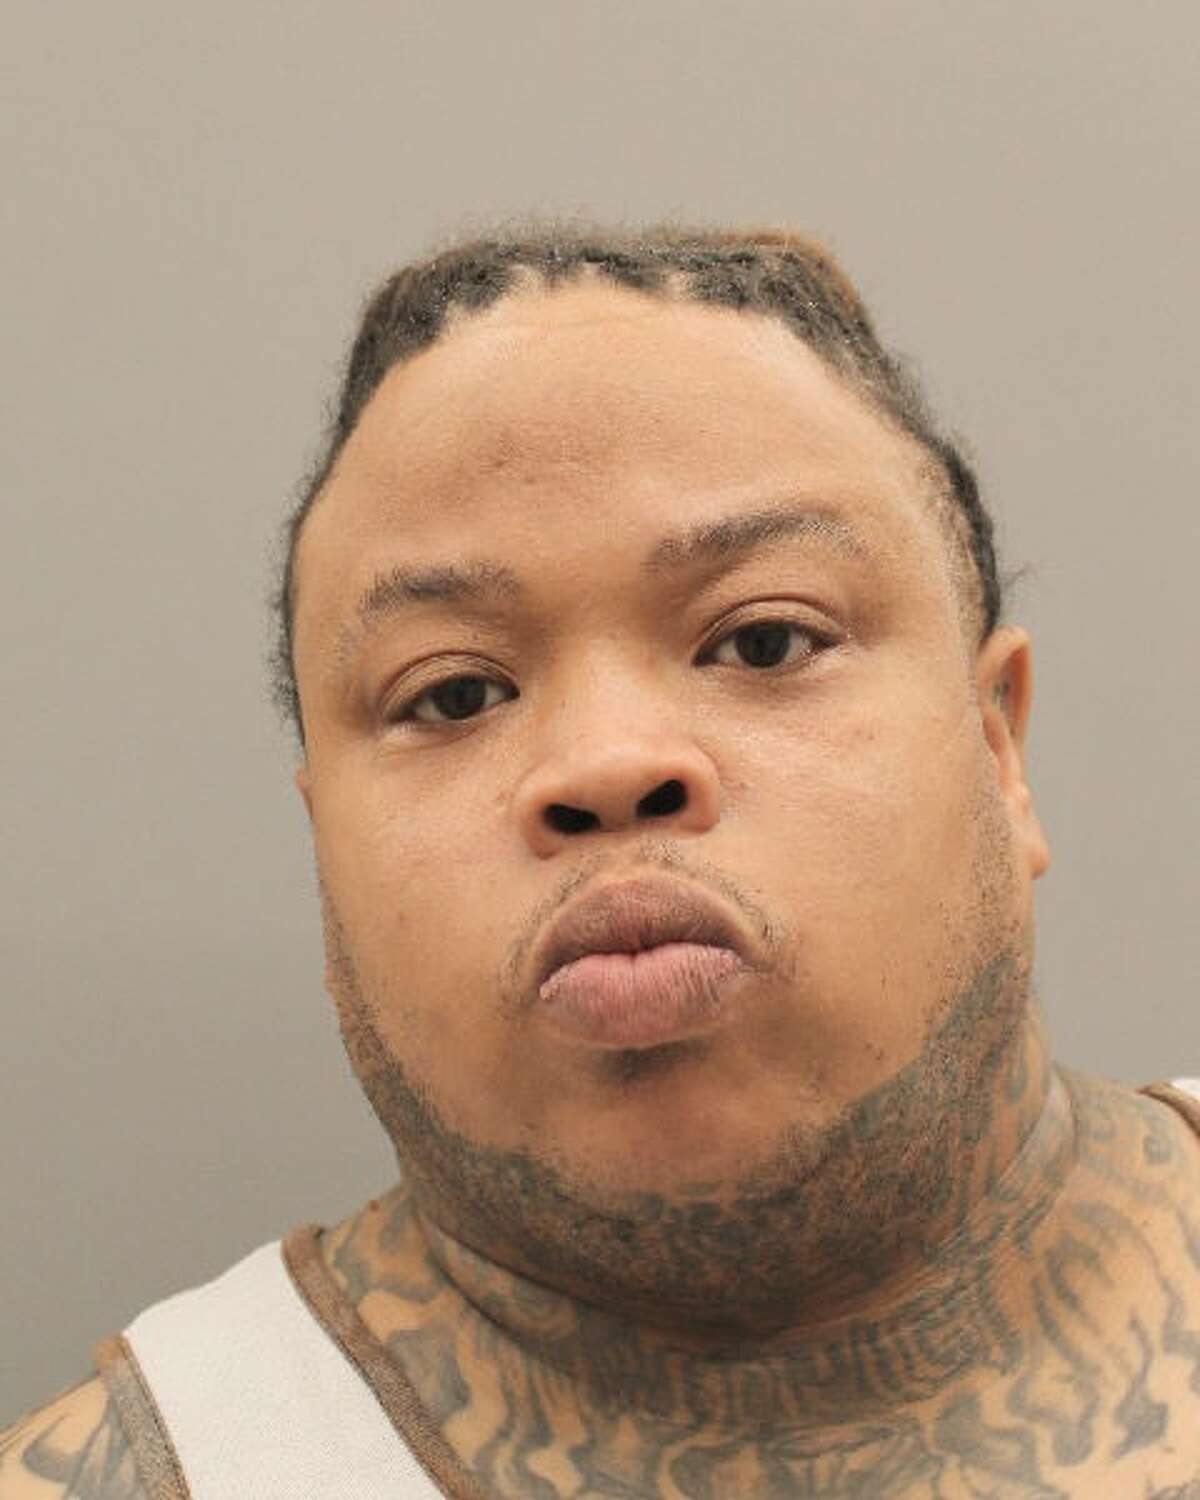 Mark Anderson, 36, of Houston was sentenced to 38 years in prison Friday for fatally shooting his wife in the chest in 2019